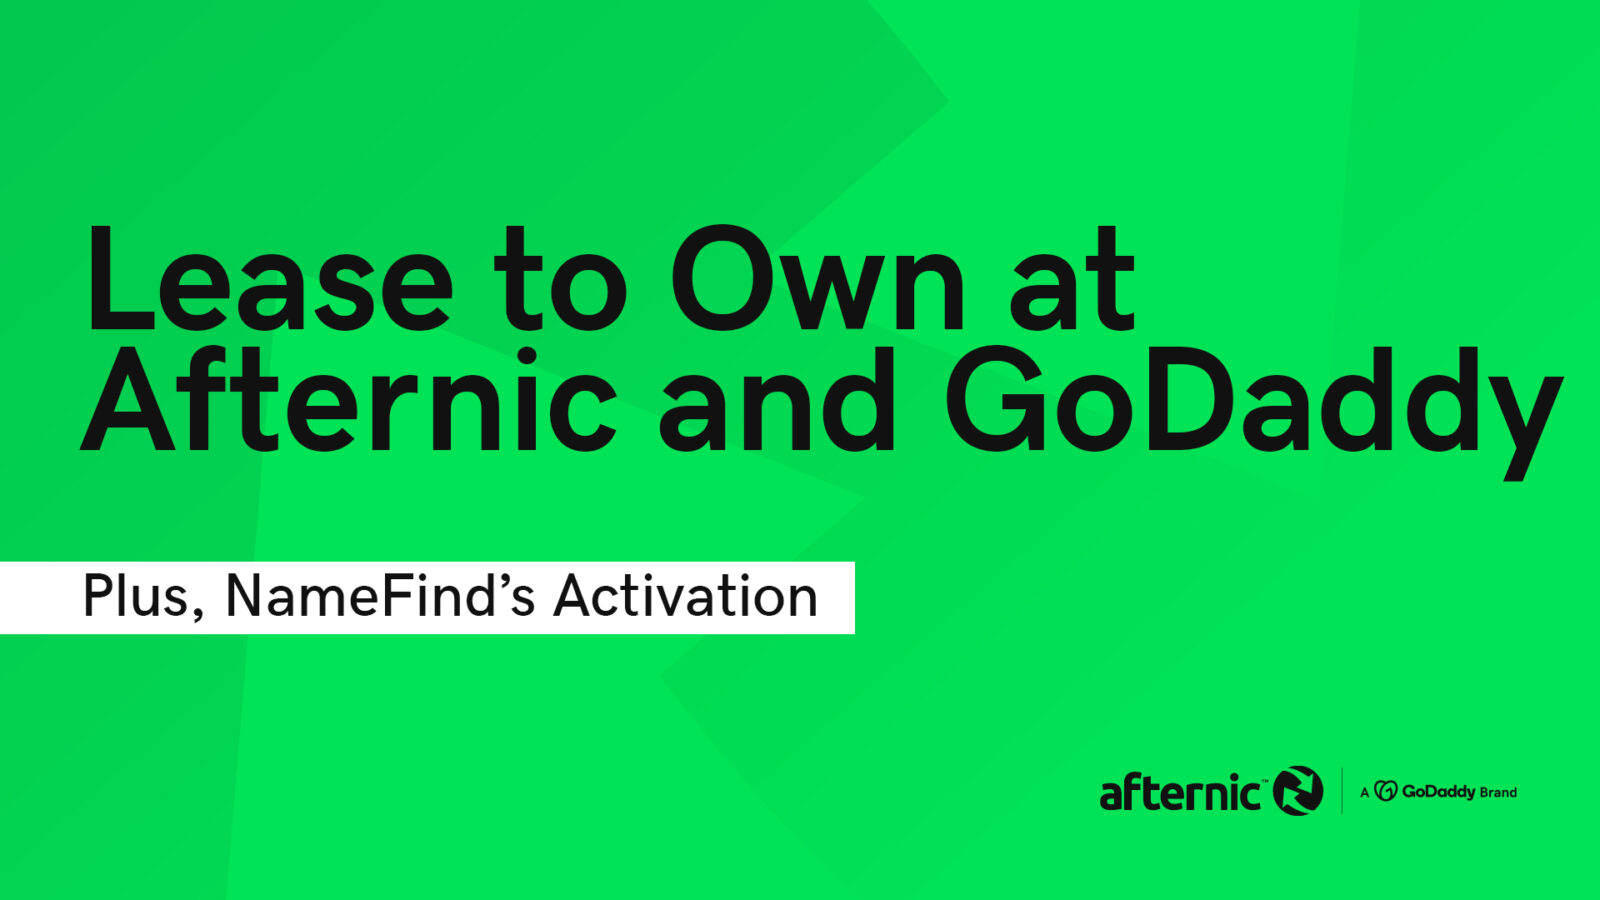 Lease to Own at Afternic and GoDaddy, plus NameFind's activation